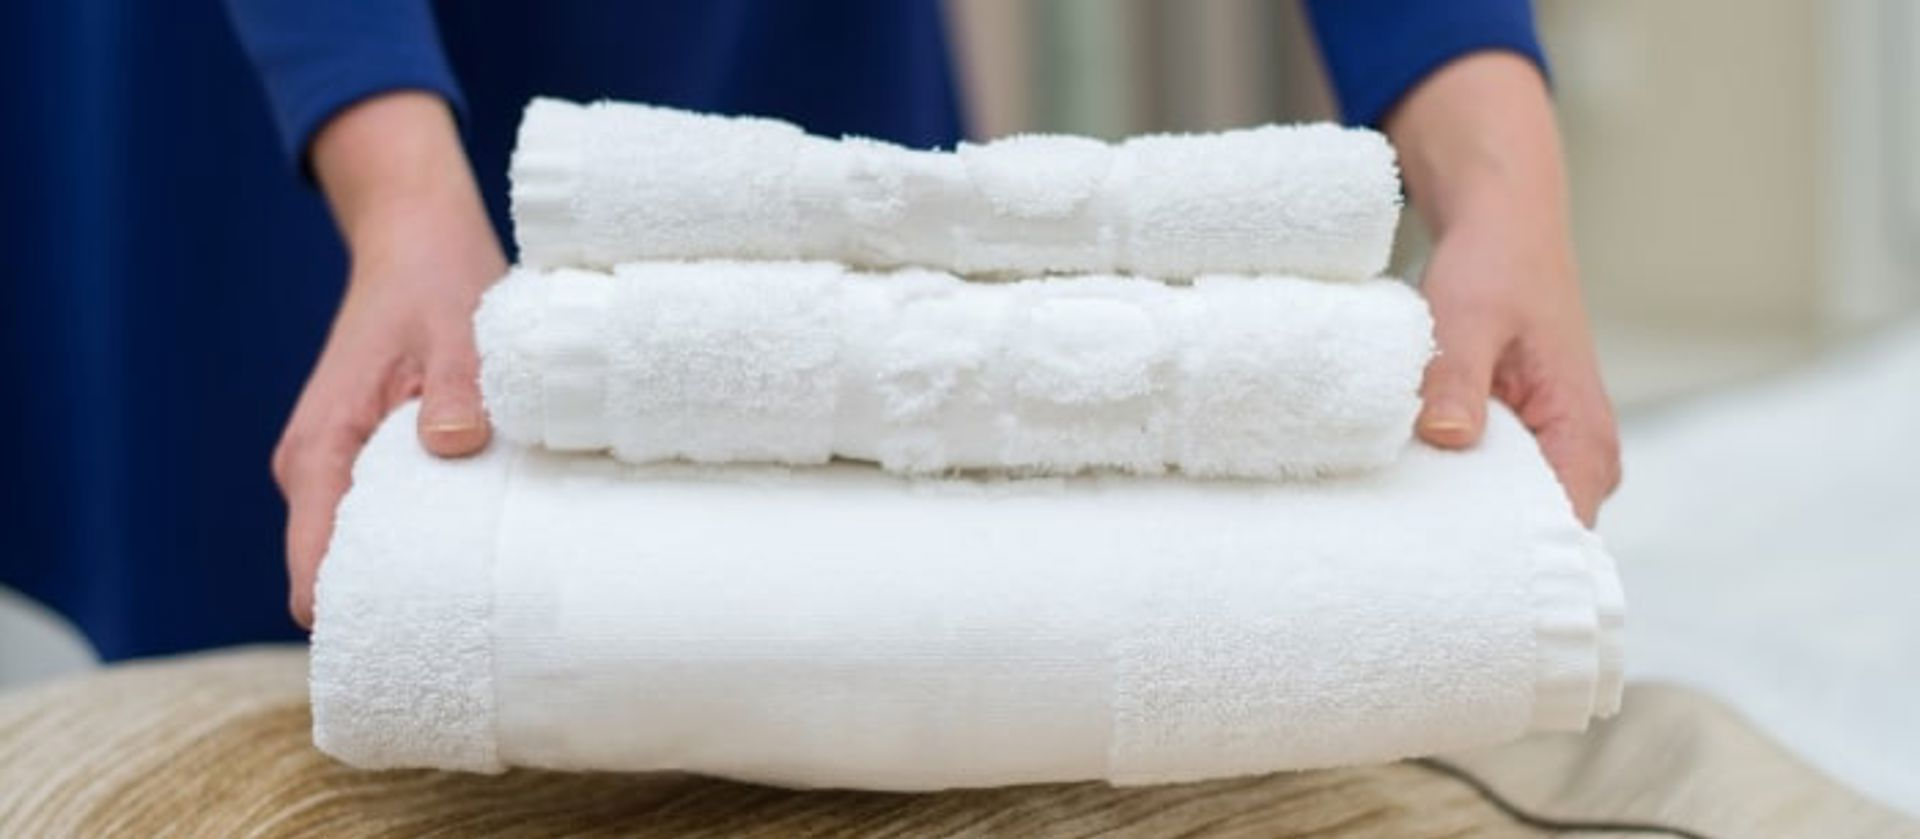 https://www.polycleanstl.com/media/kp0hivg5/woman-changing-hotel-room-towels-min.jpg?anchor=center&mode=pad&width=1920&format=webp&quality=80